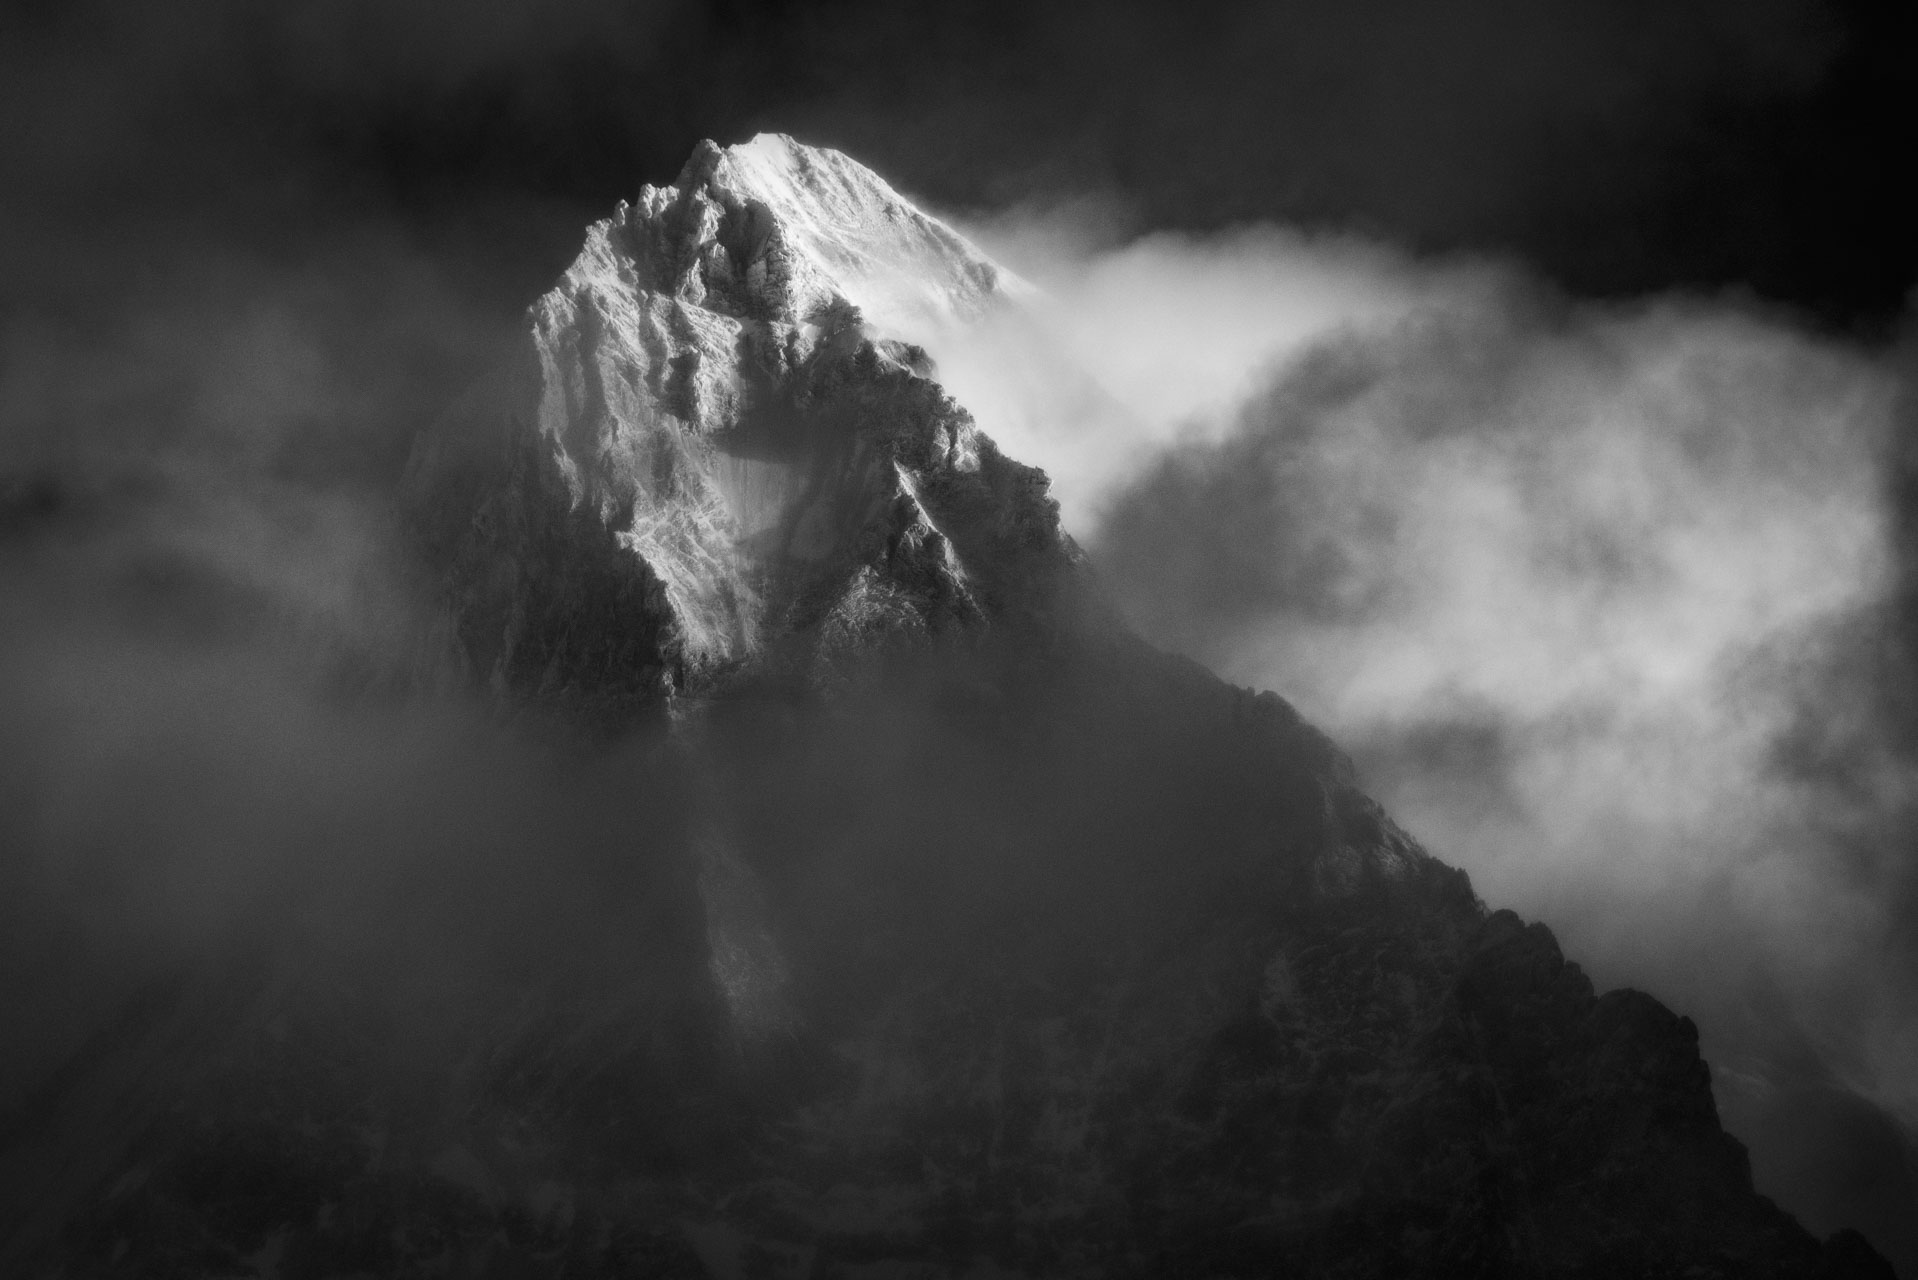 Black and white mountain image - Dent Blanche seen from de val d'Hérens